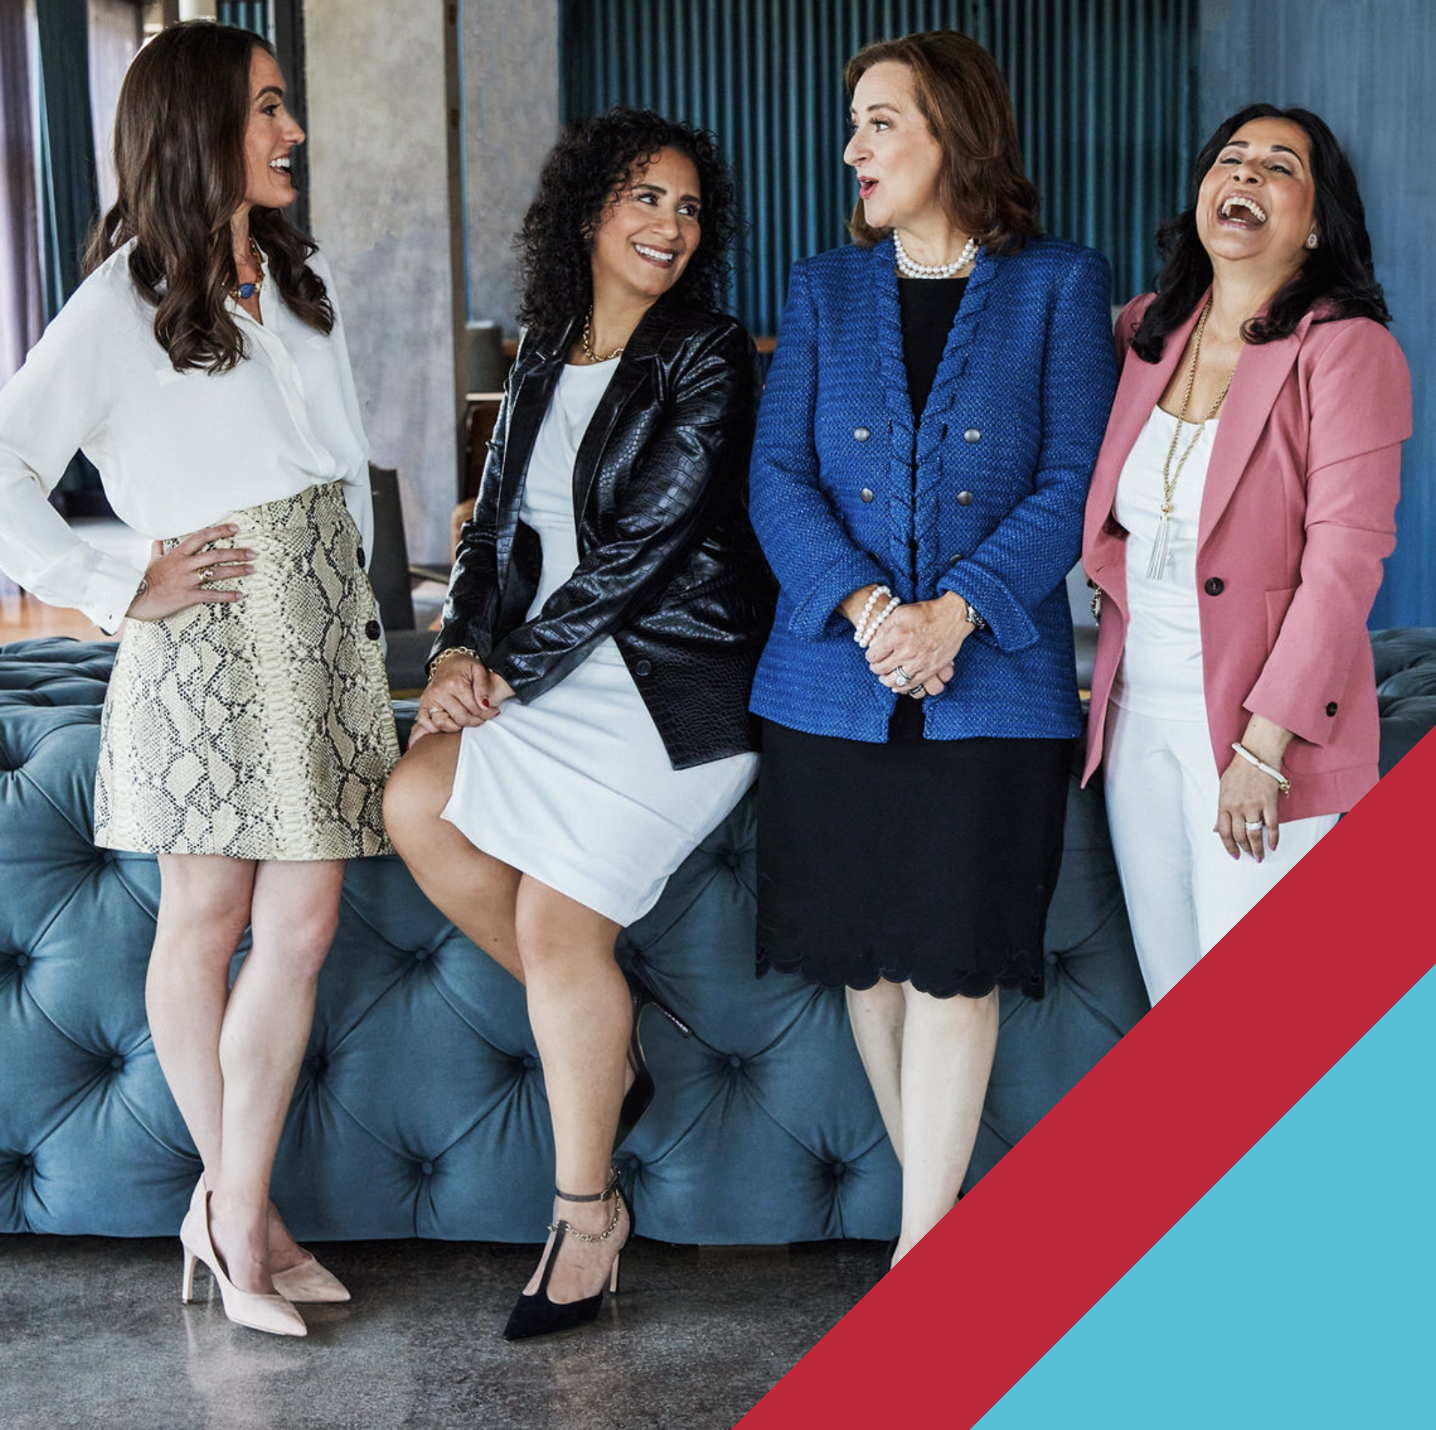 Image of four Beyond Barriers co-founders Laura Ricketts, Brooke Skinner Ricketts, Nikki Barua and Monica Marquez